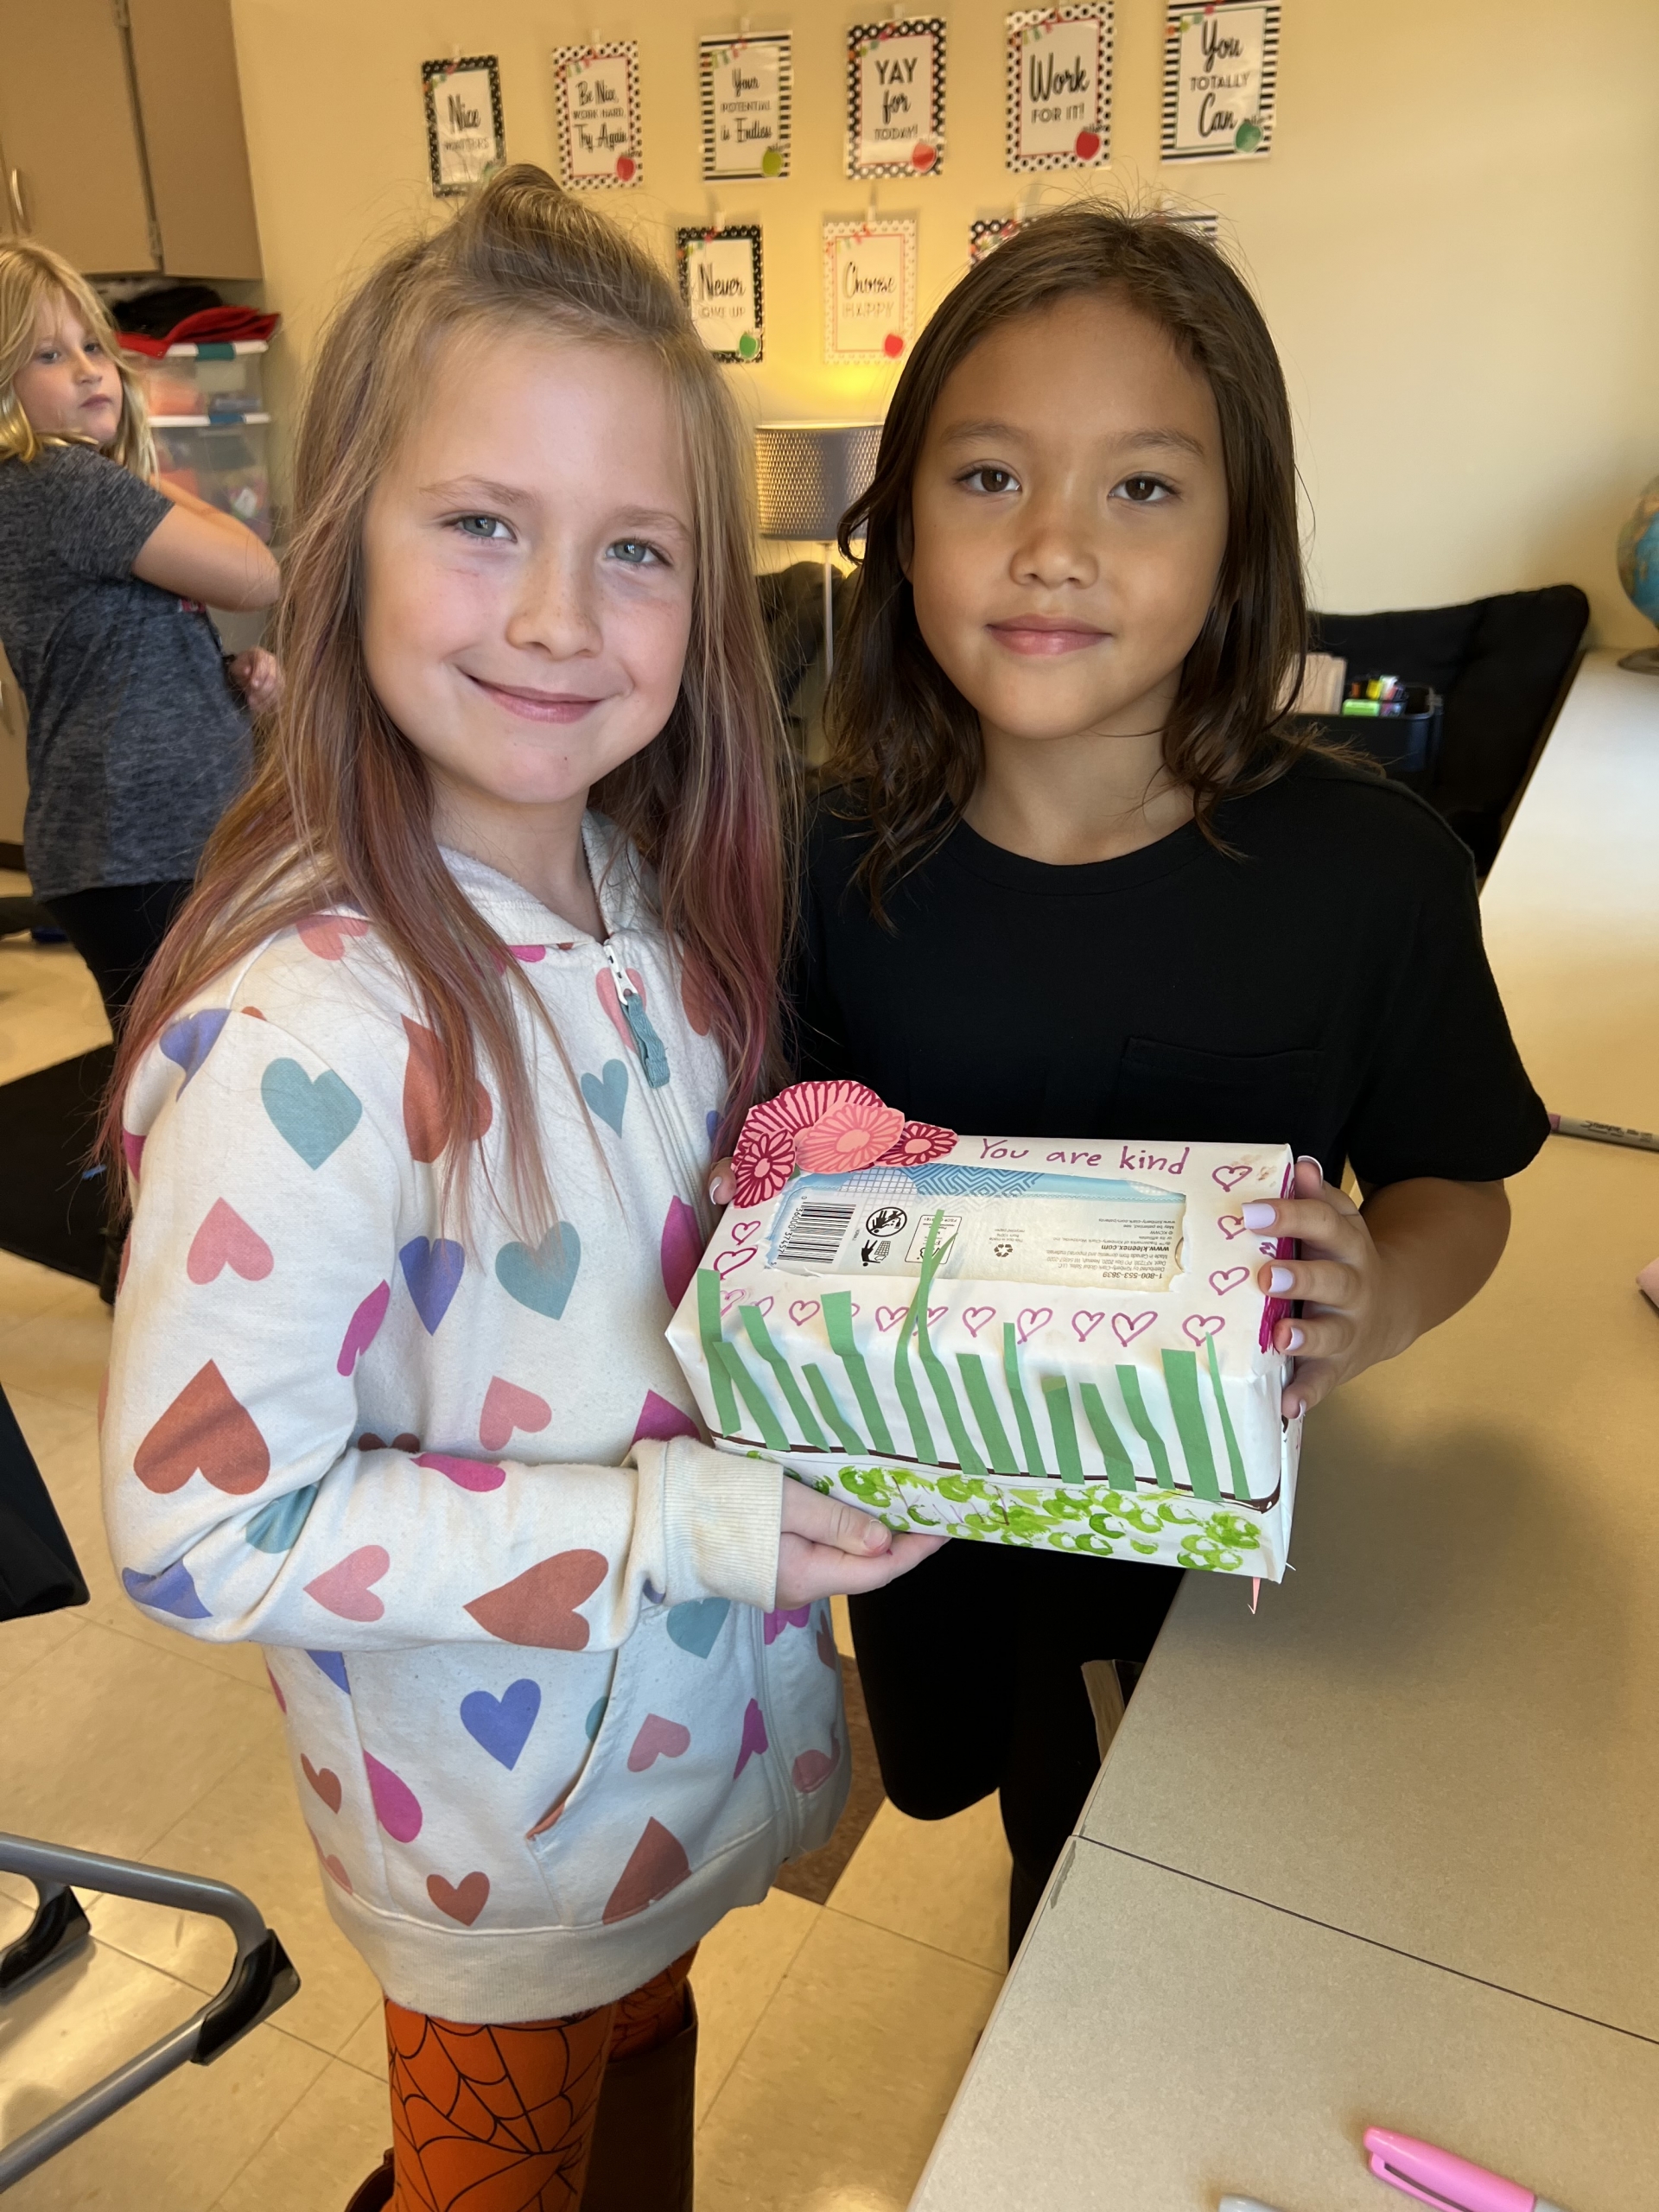 Mrs. Walters' class did a Spread the Joy Craft. They decorated Kleenex boxes and then they went to visit the Dyer nursing home.